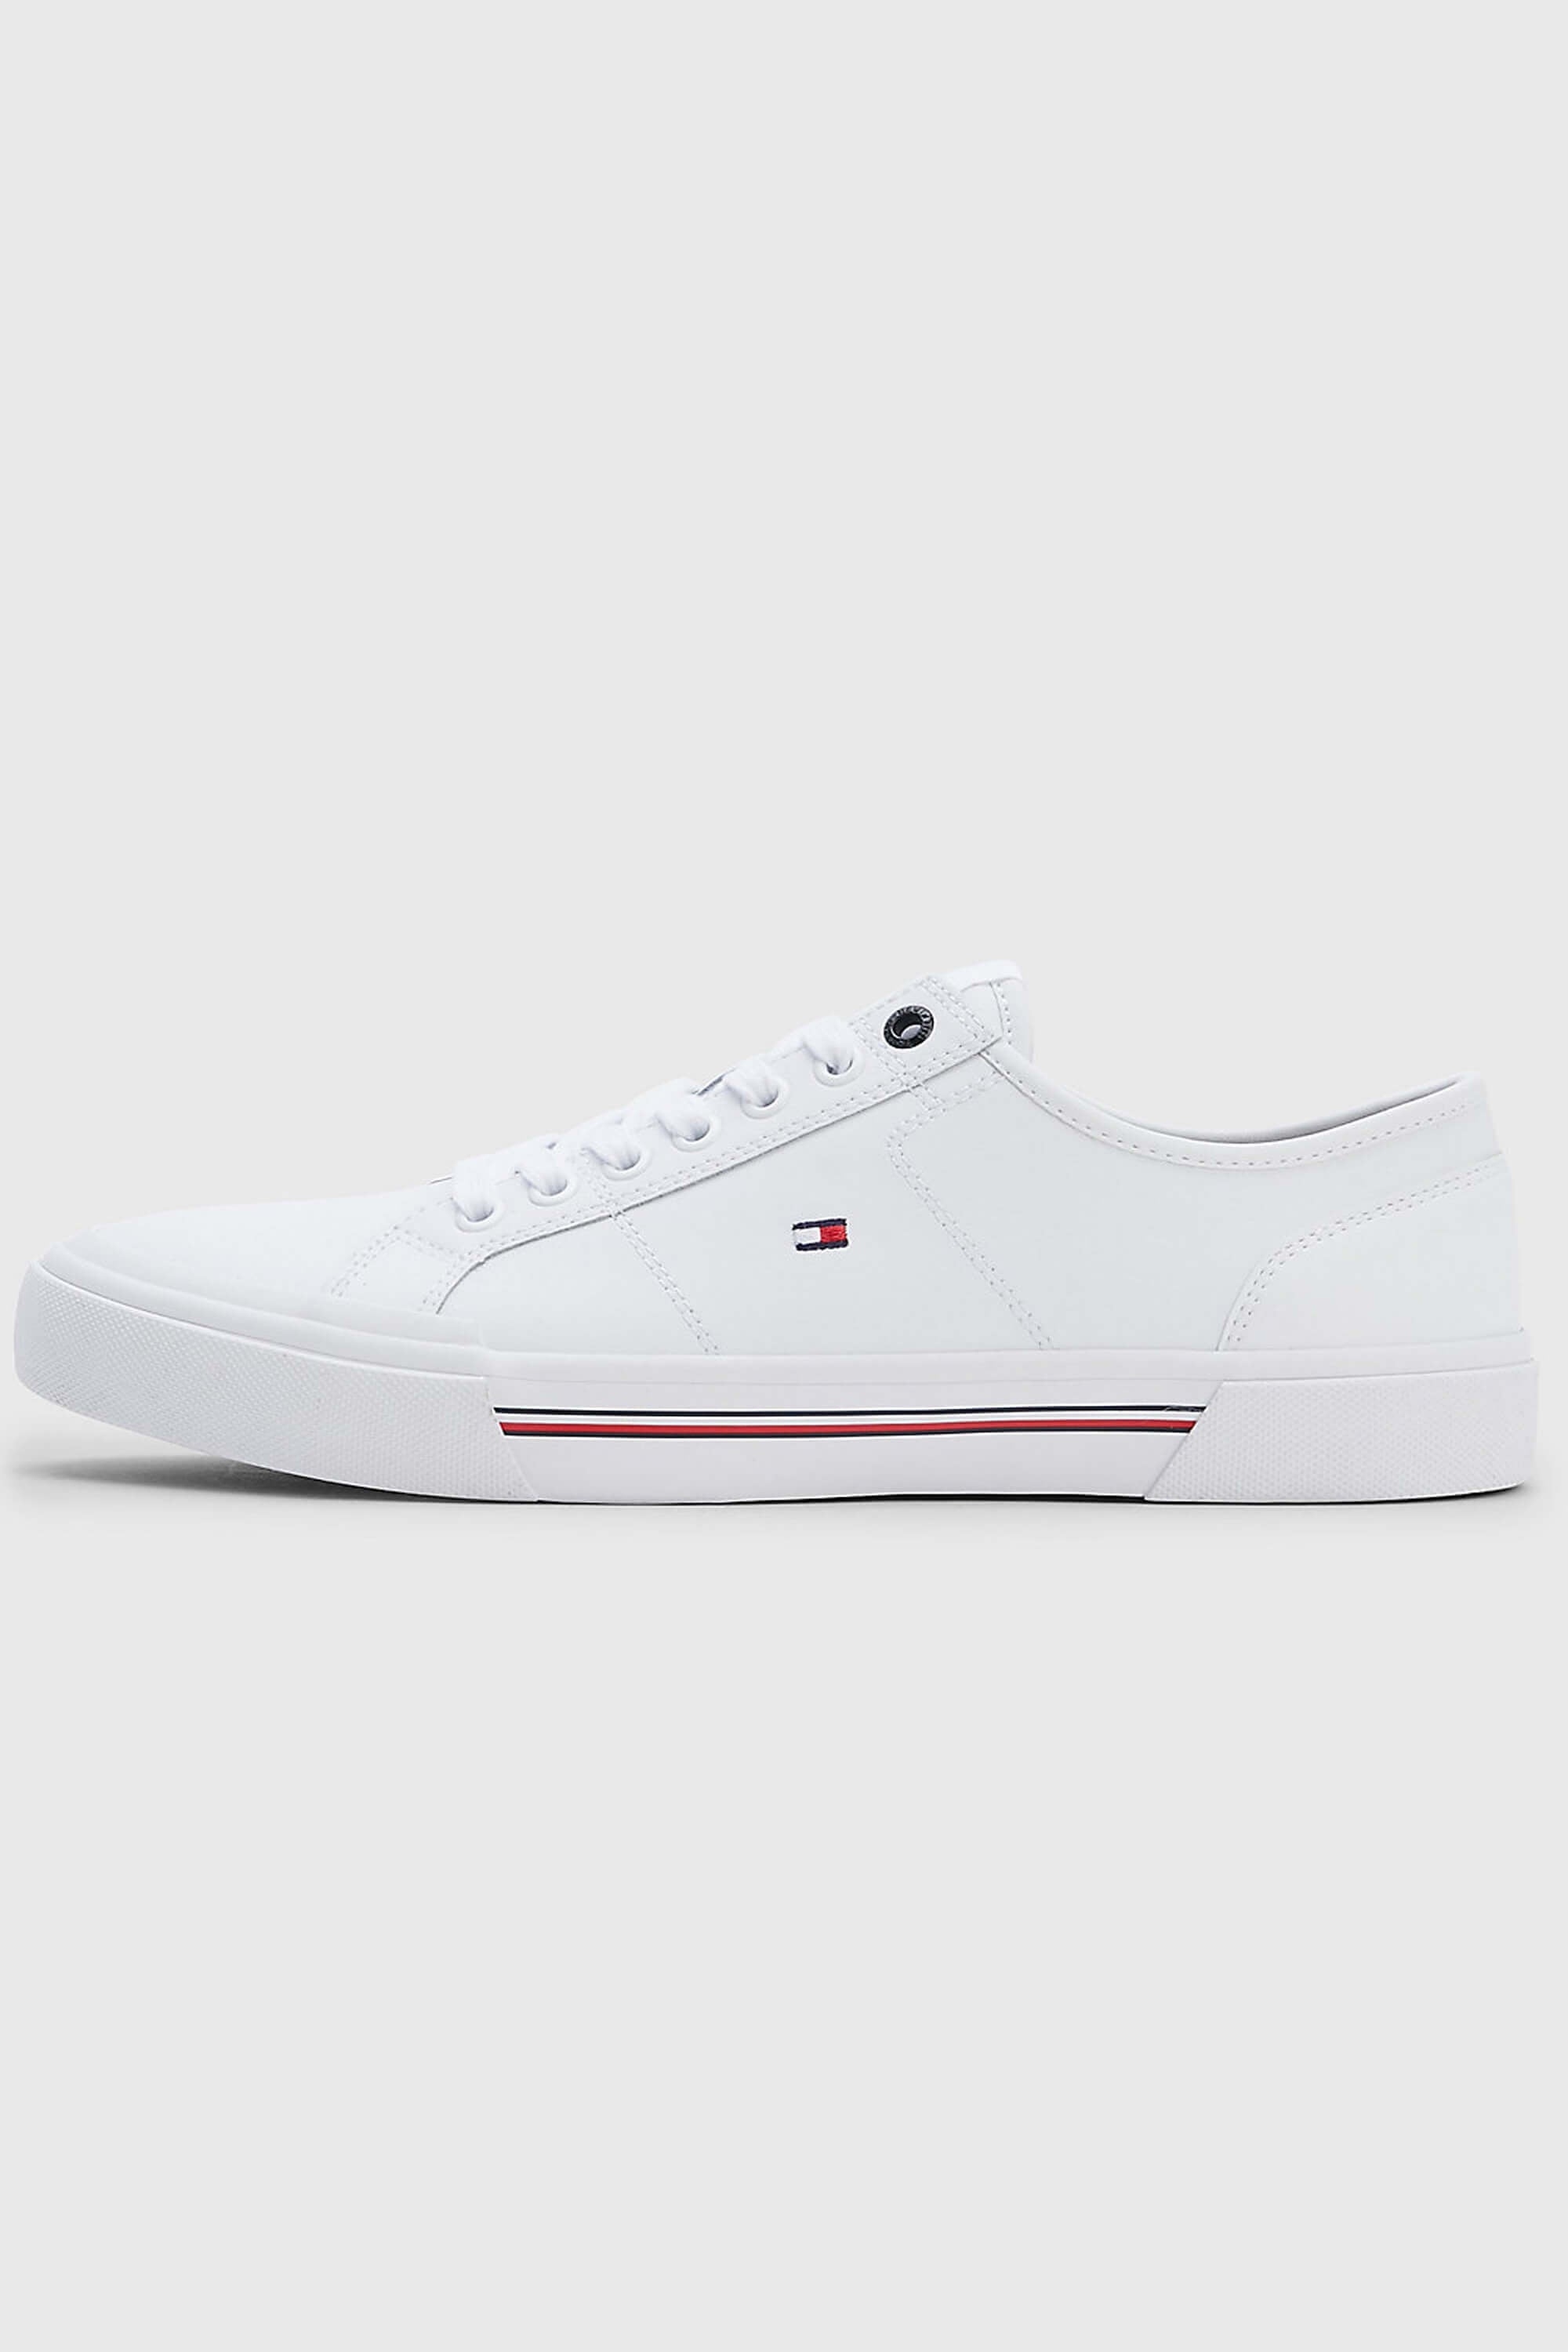 Tommy Hilfiger Core Corporate Leather Trainer White